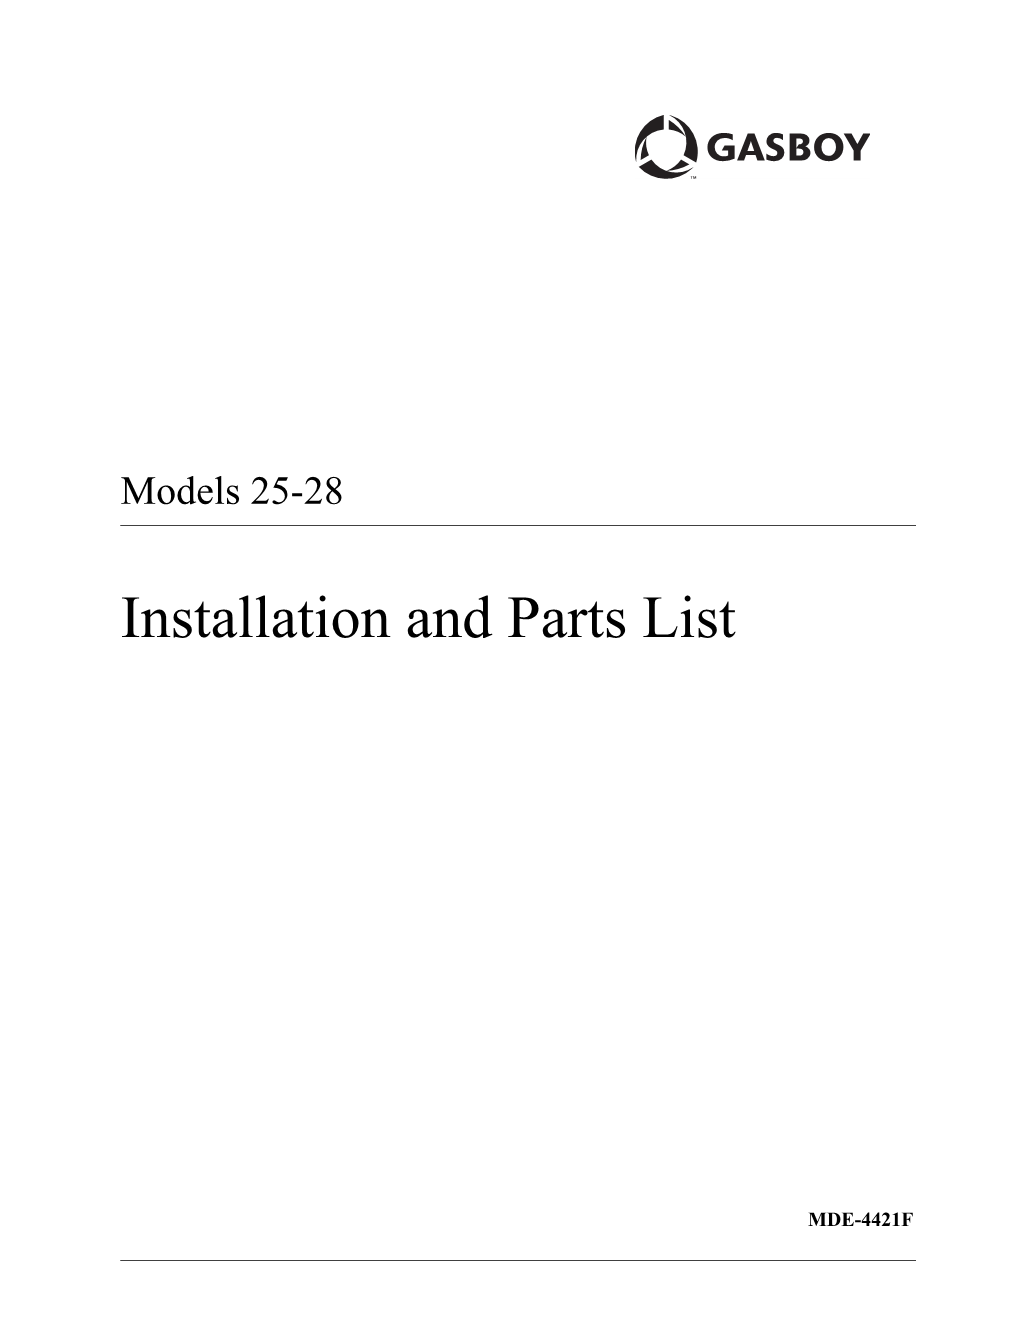 Installation and Parts List